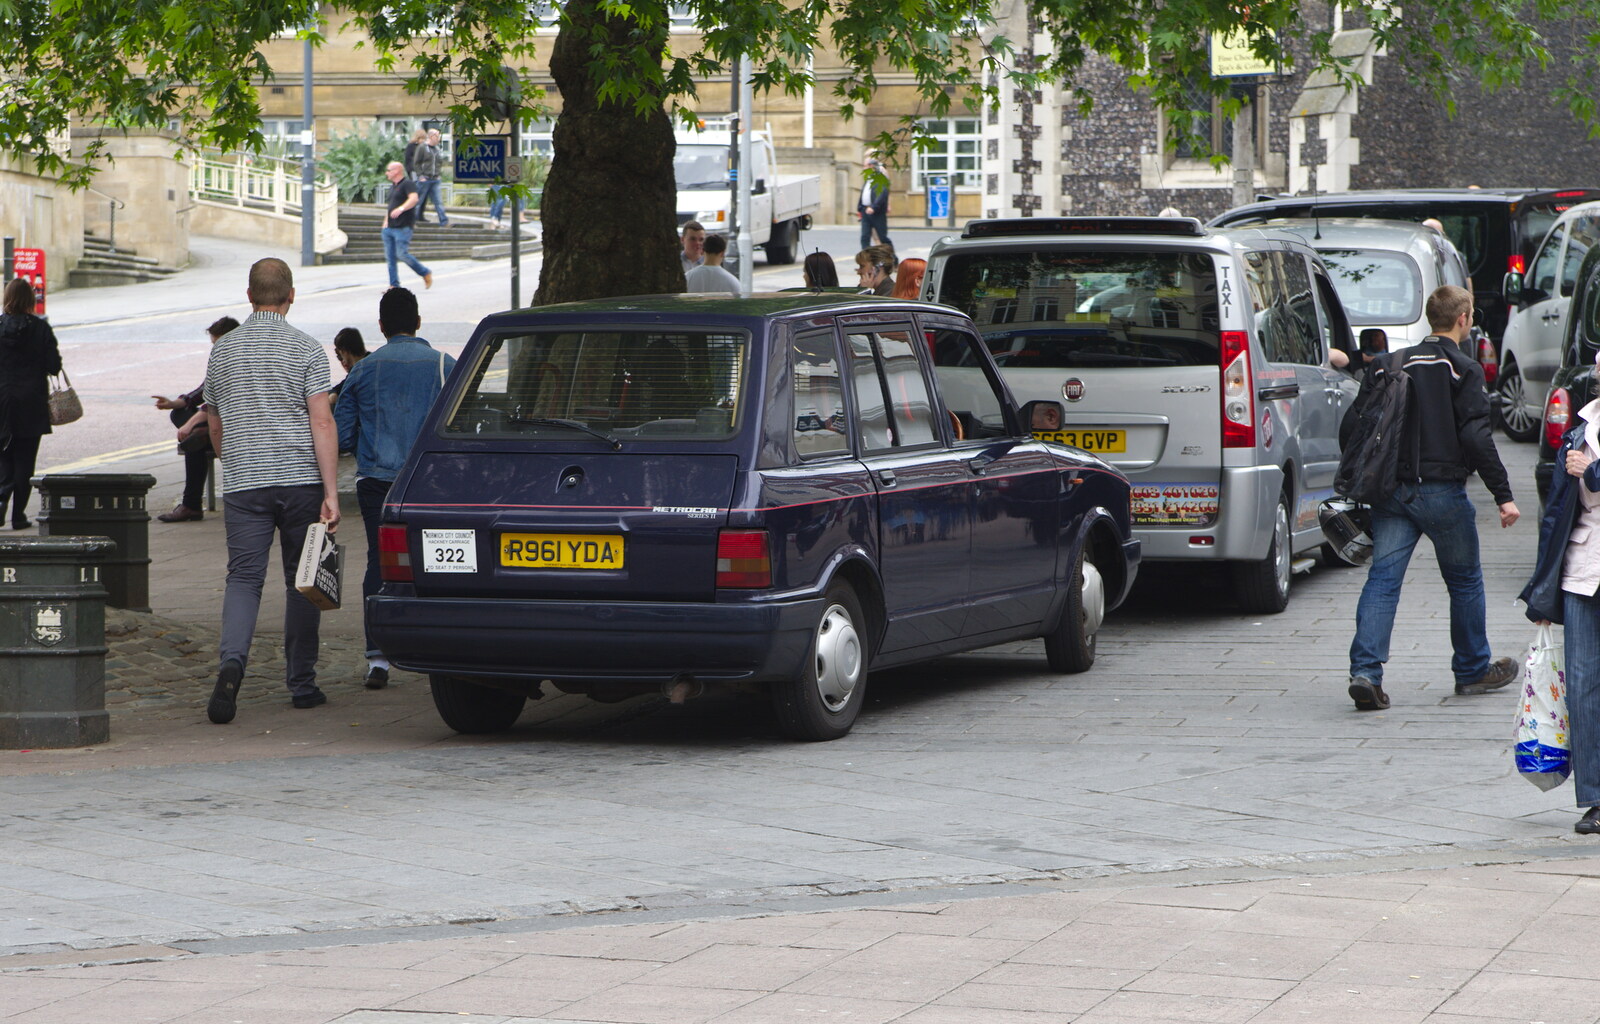 An ancient mid-90s taxi from Sis and Matt Visit, Suffolk and Norfolk - 31st May 2014